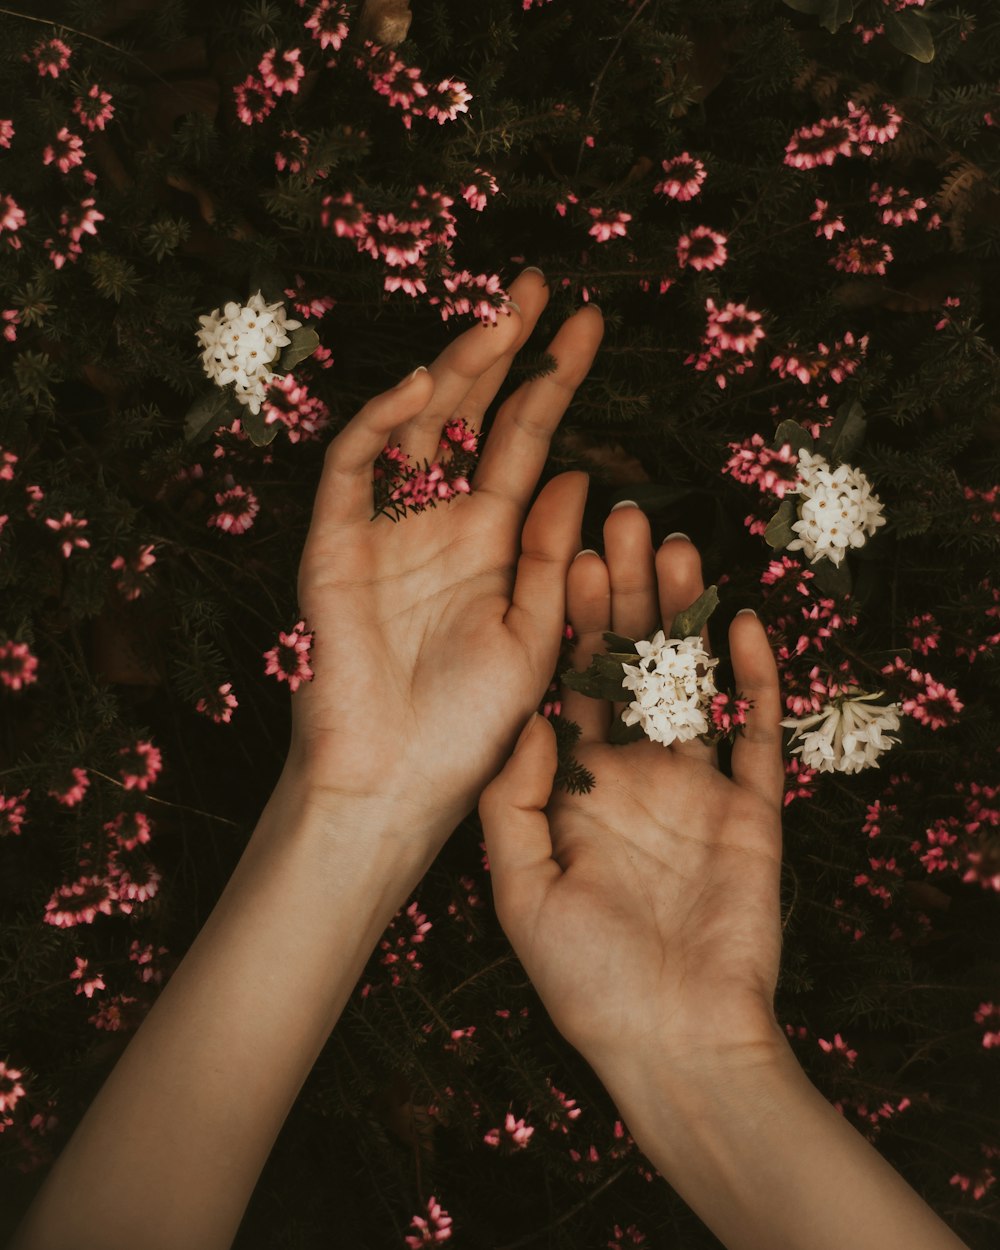 person holding white and pink flowers